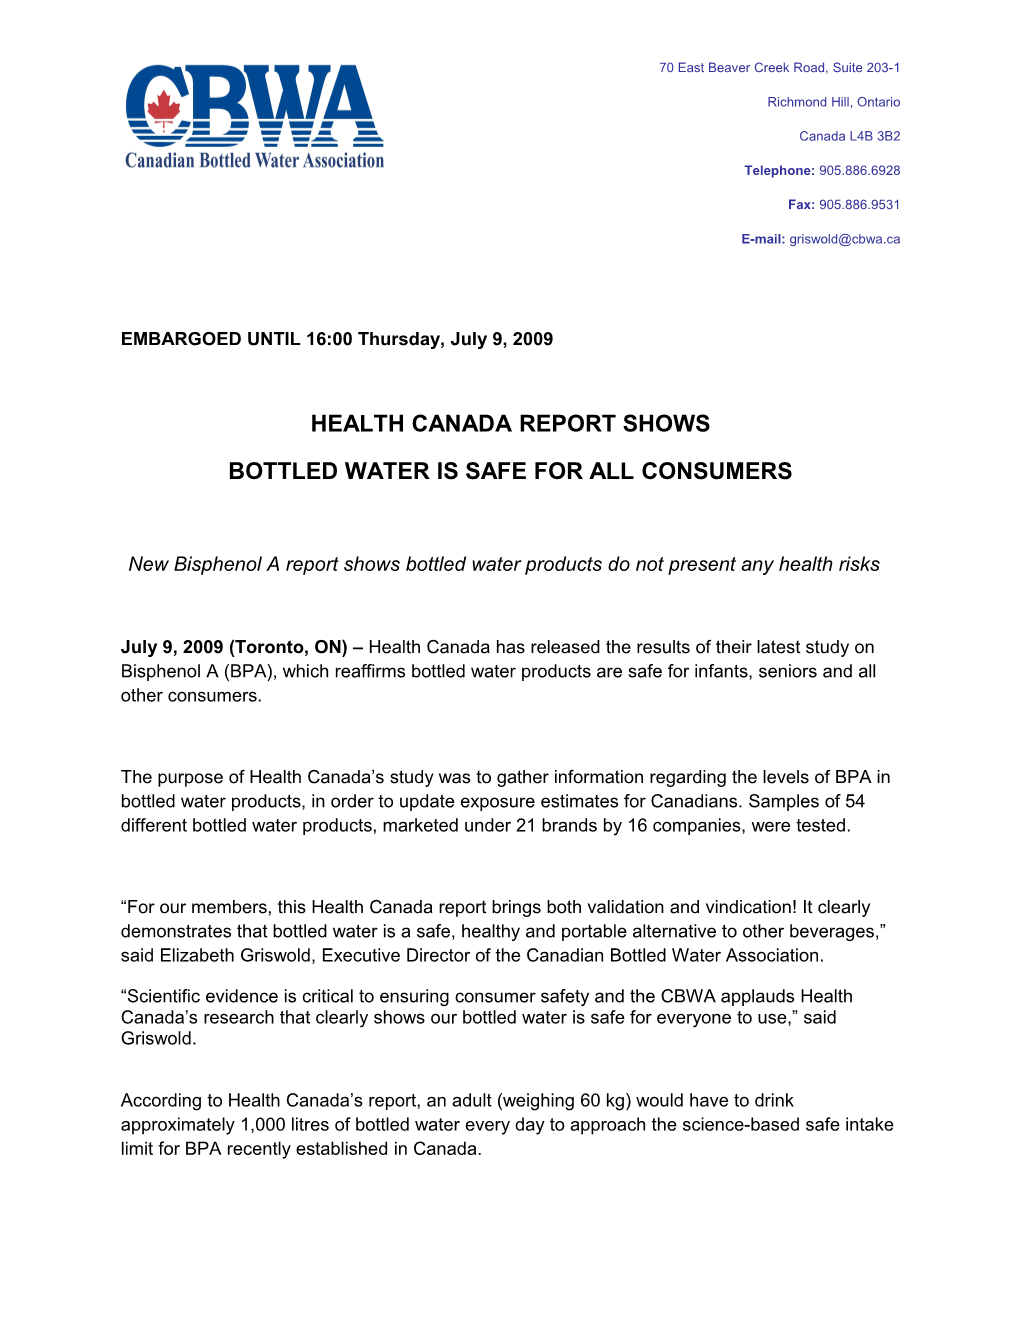 Health Canada Reports Bottled Water Is Safe for All Consumers